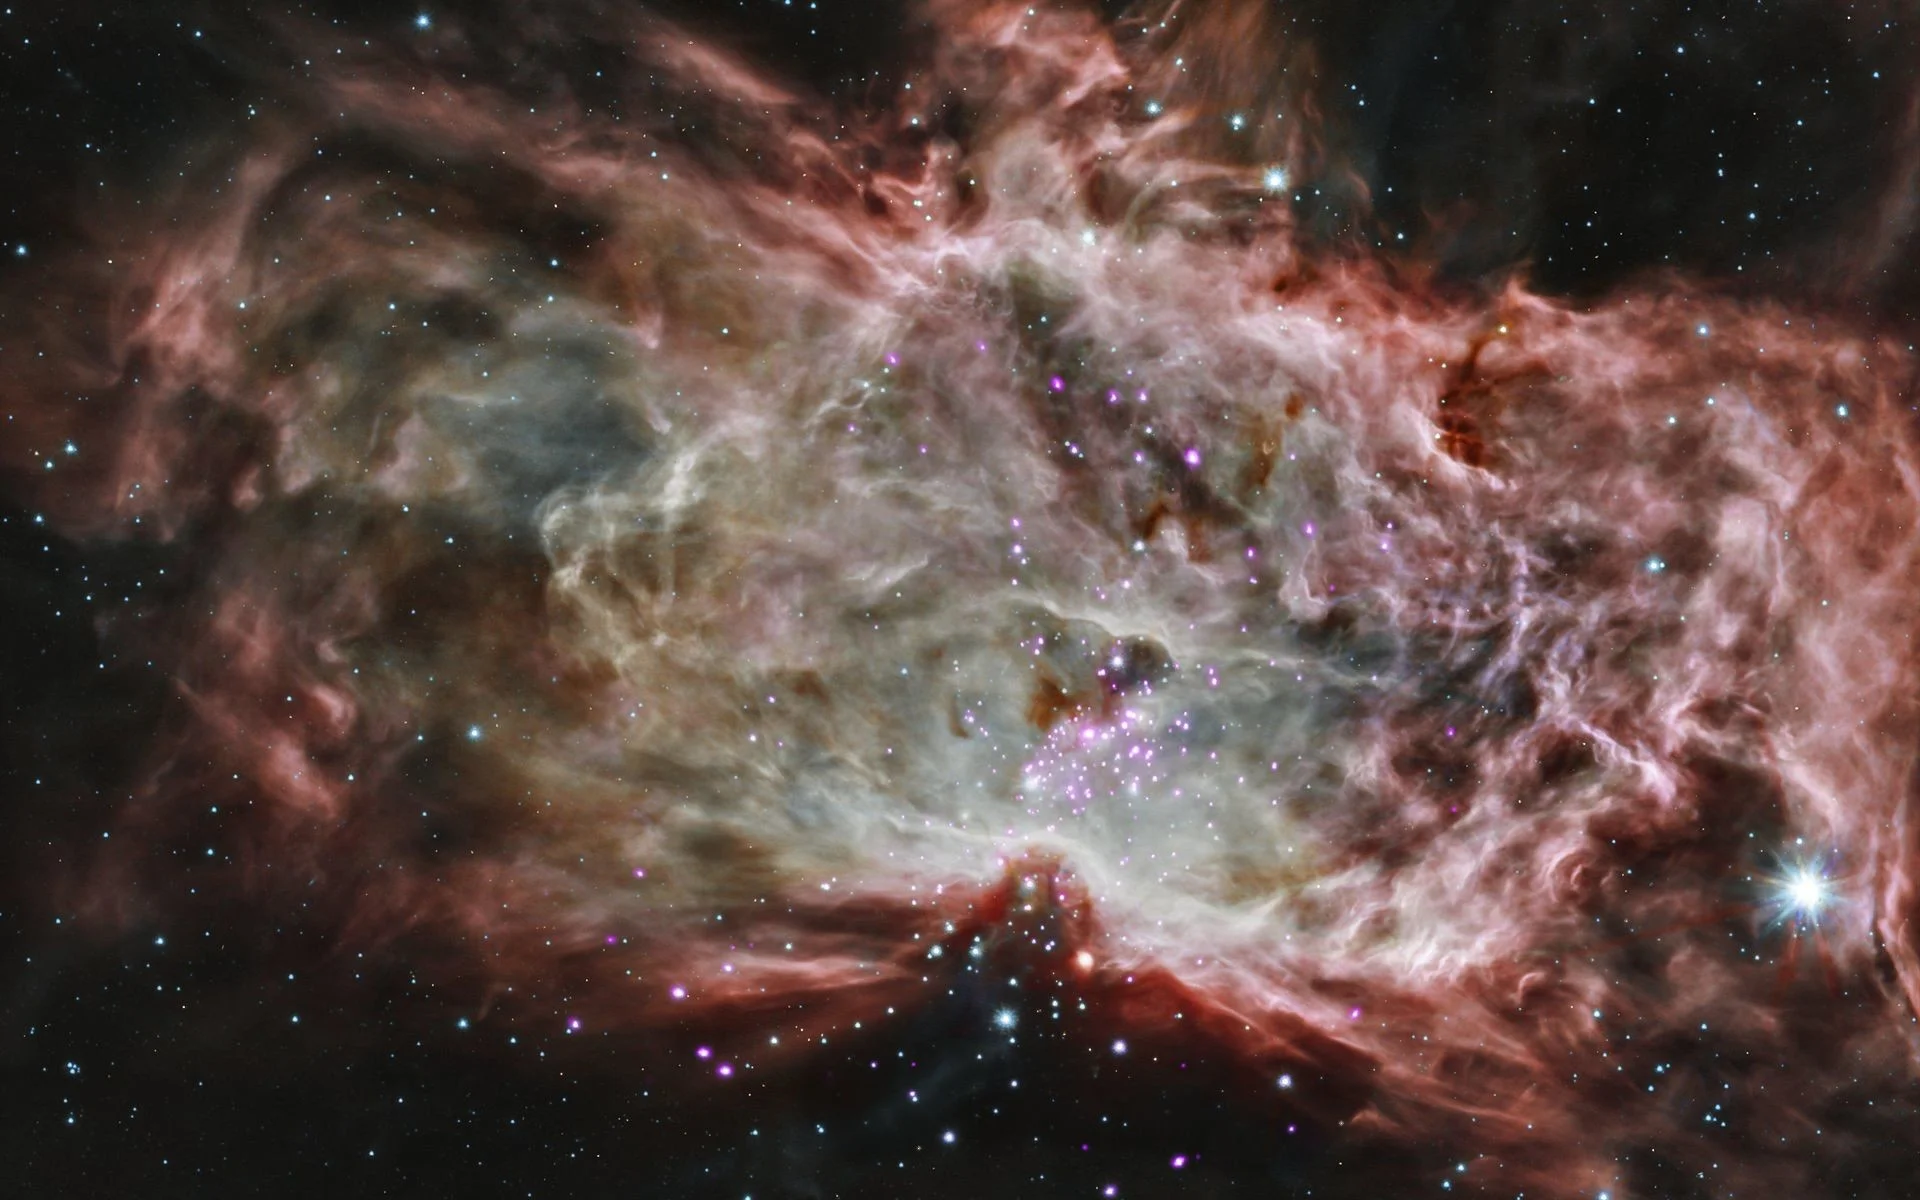 This composite image shows one of the clusters, NGC 2024, which is found in